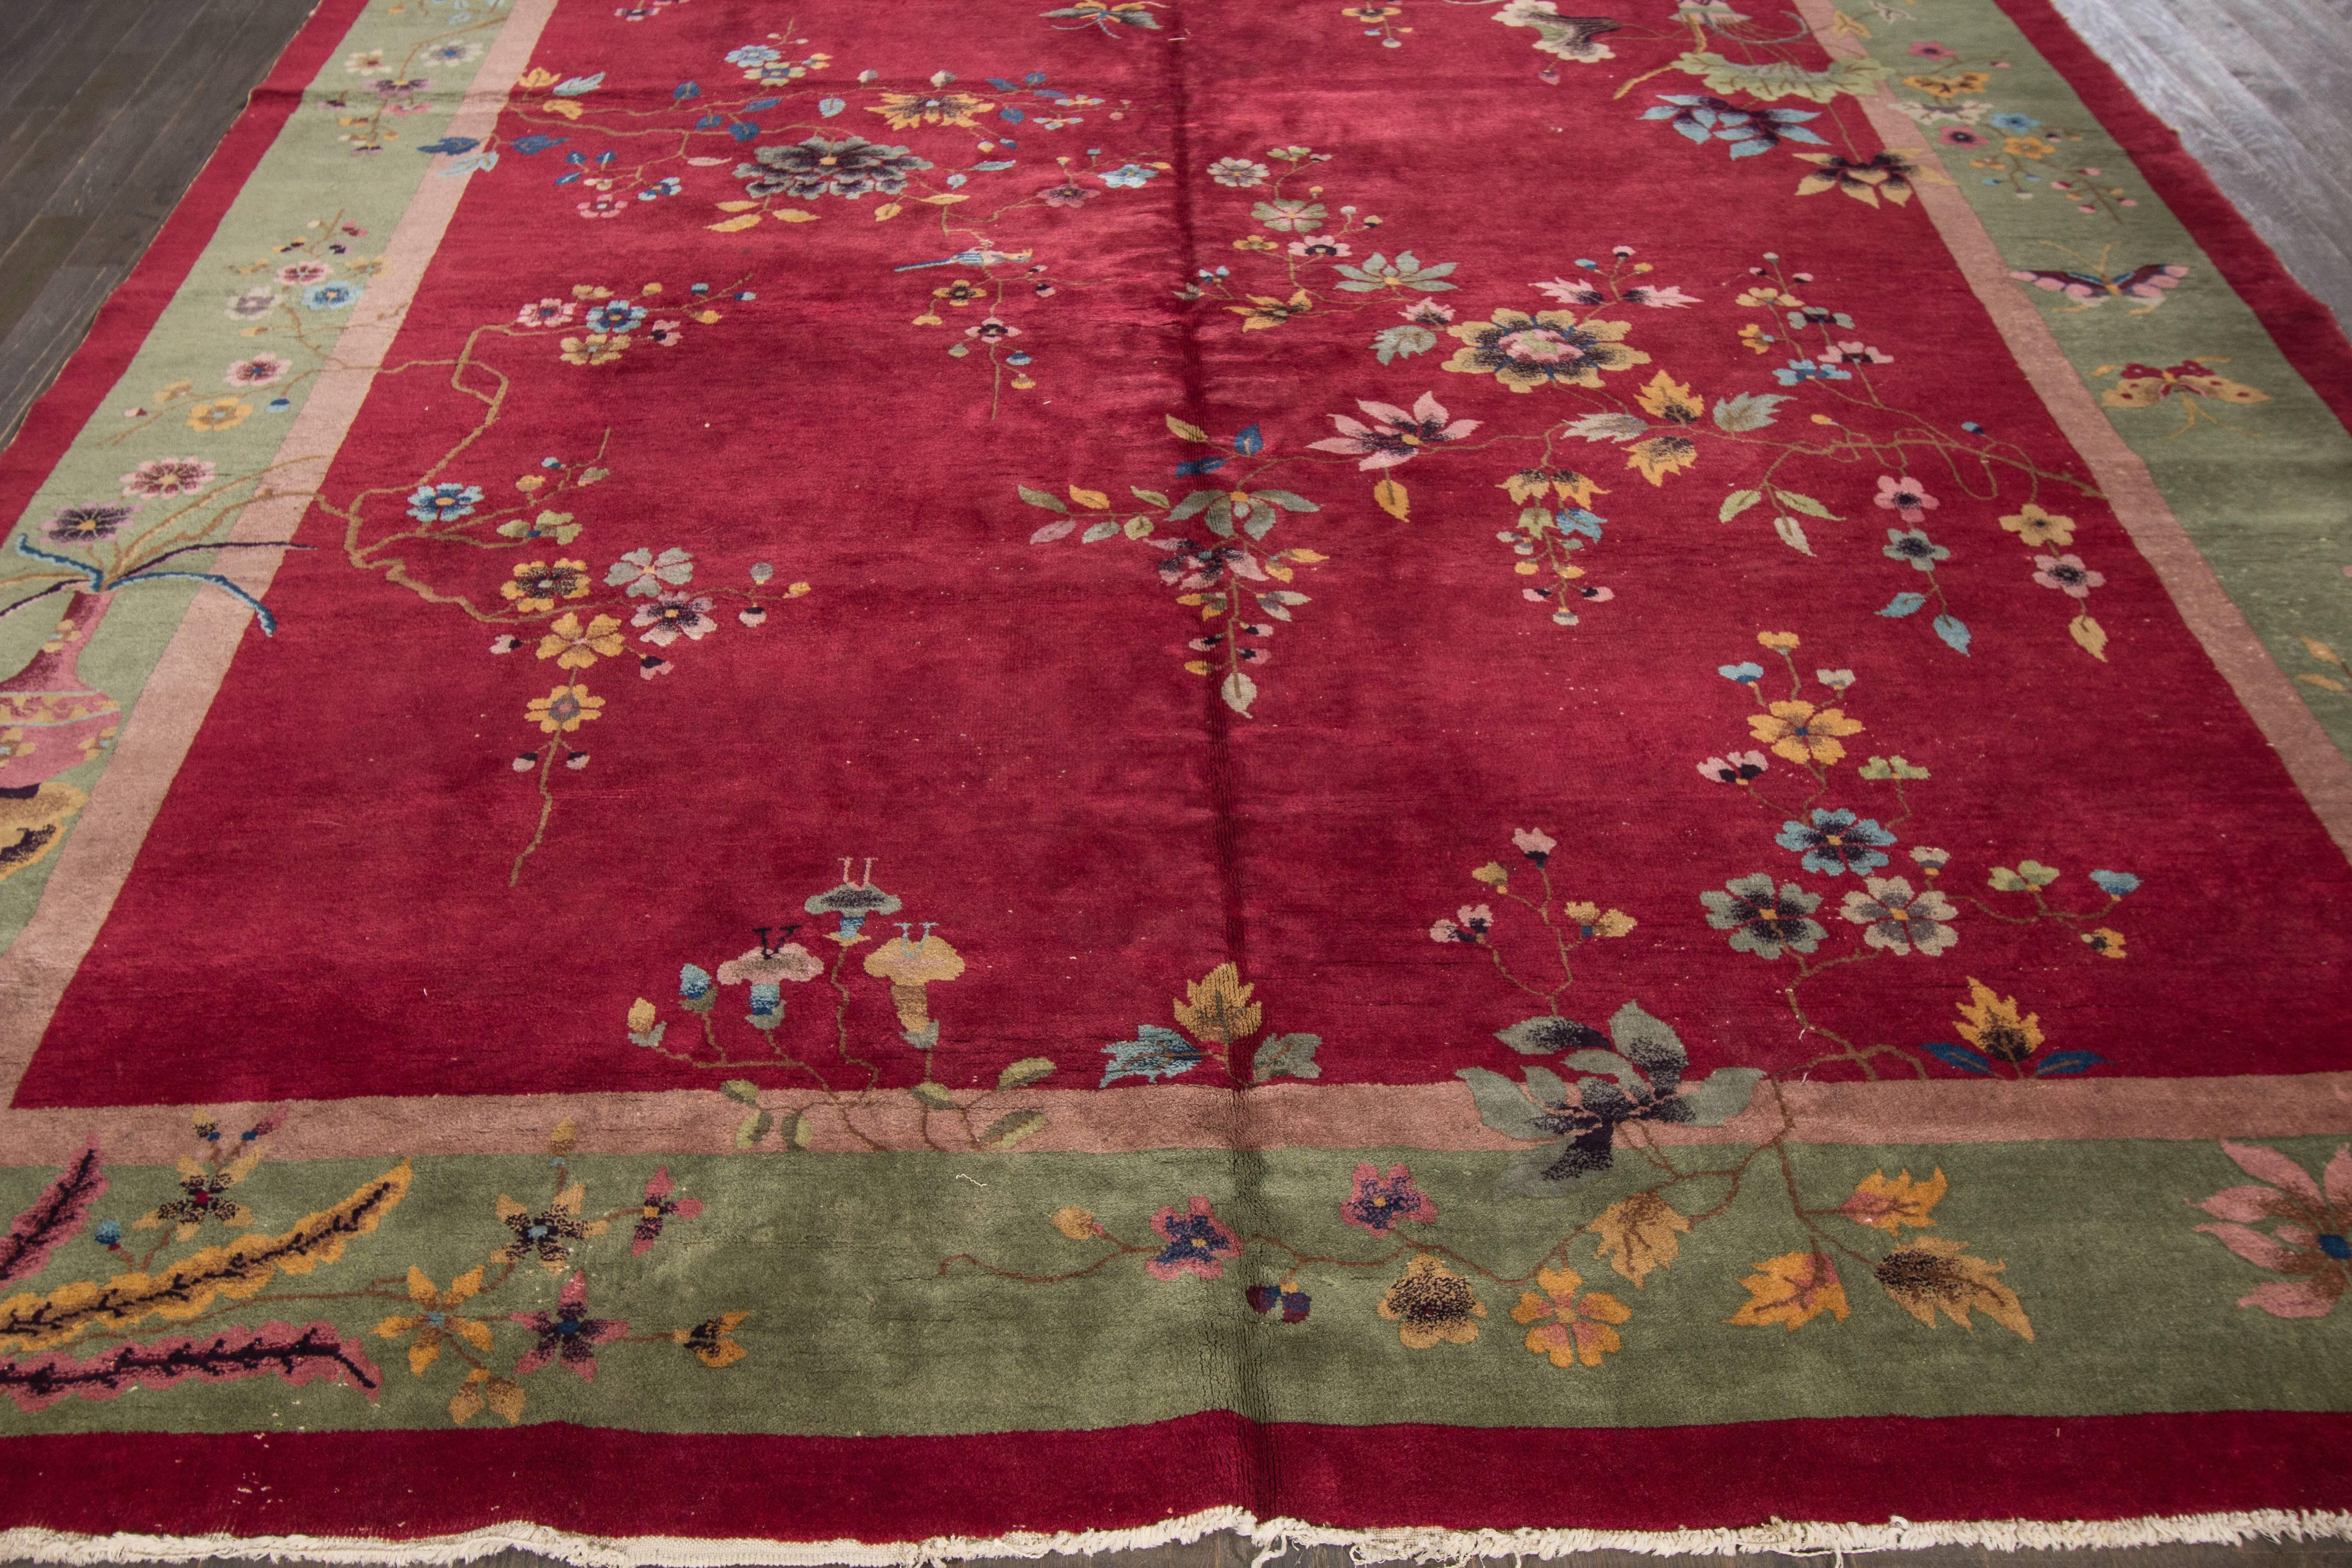 Antique Chinese deco with a floral design on a red field.
Material: Wool. Measures: 9' x 12'.